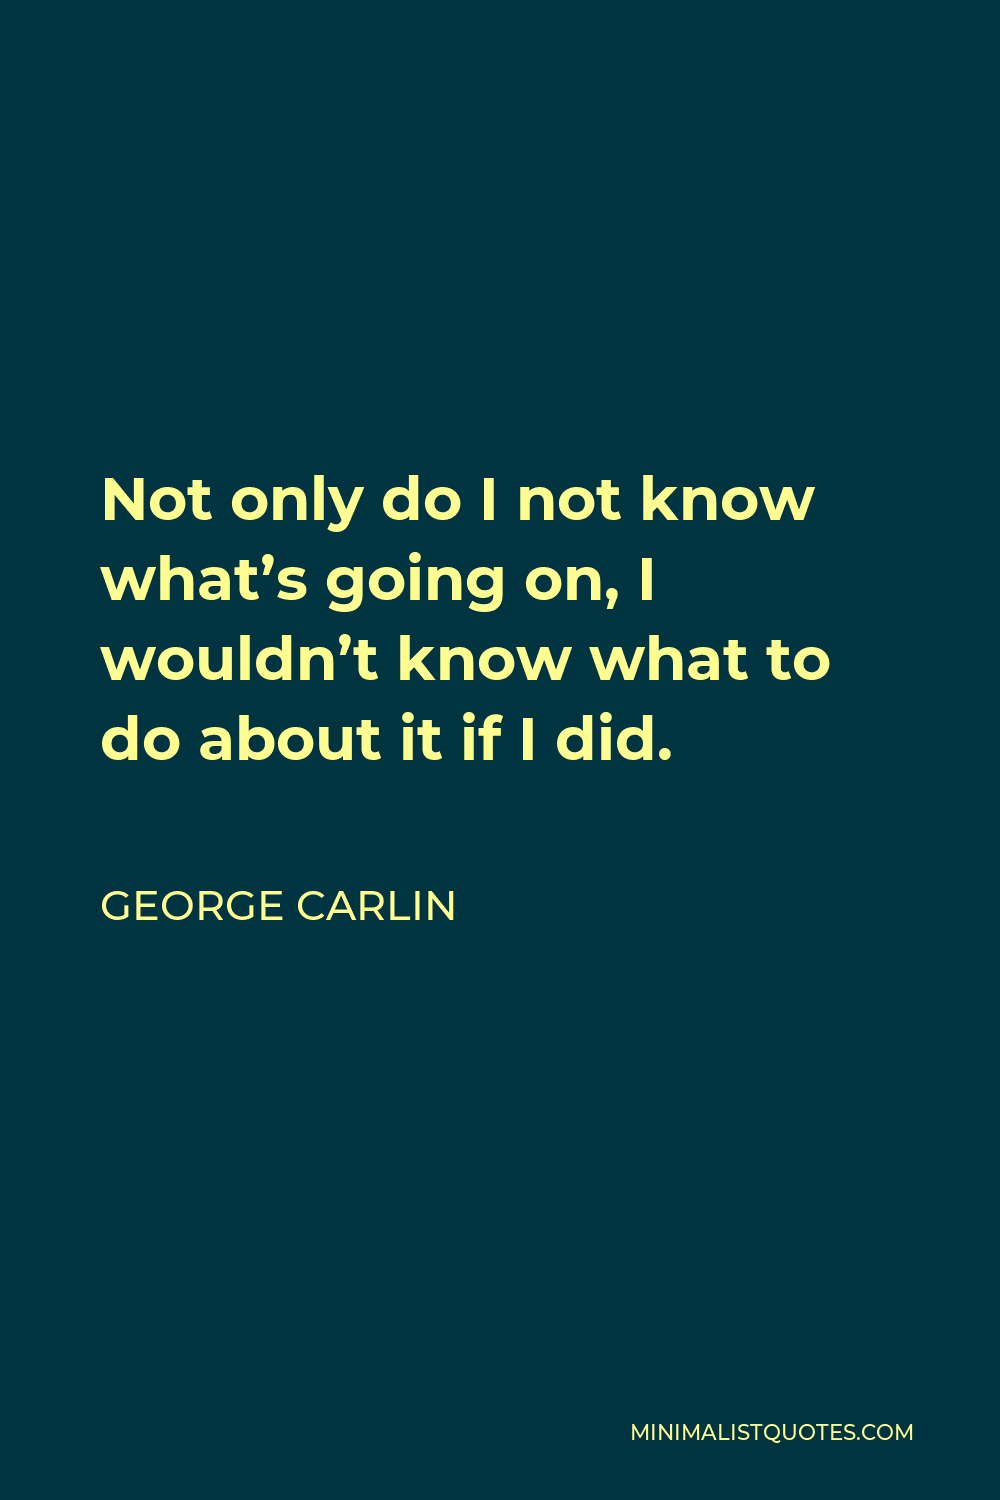 George Carlin Quote - Not only do I not know what’s going on, I wouldn’t know what to do about it if I did.